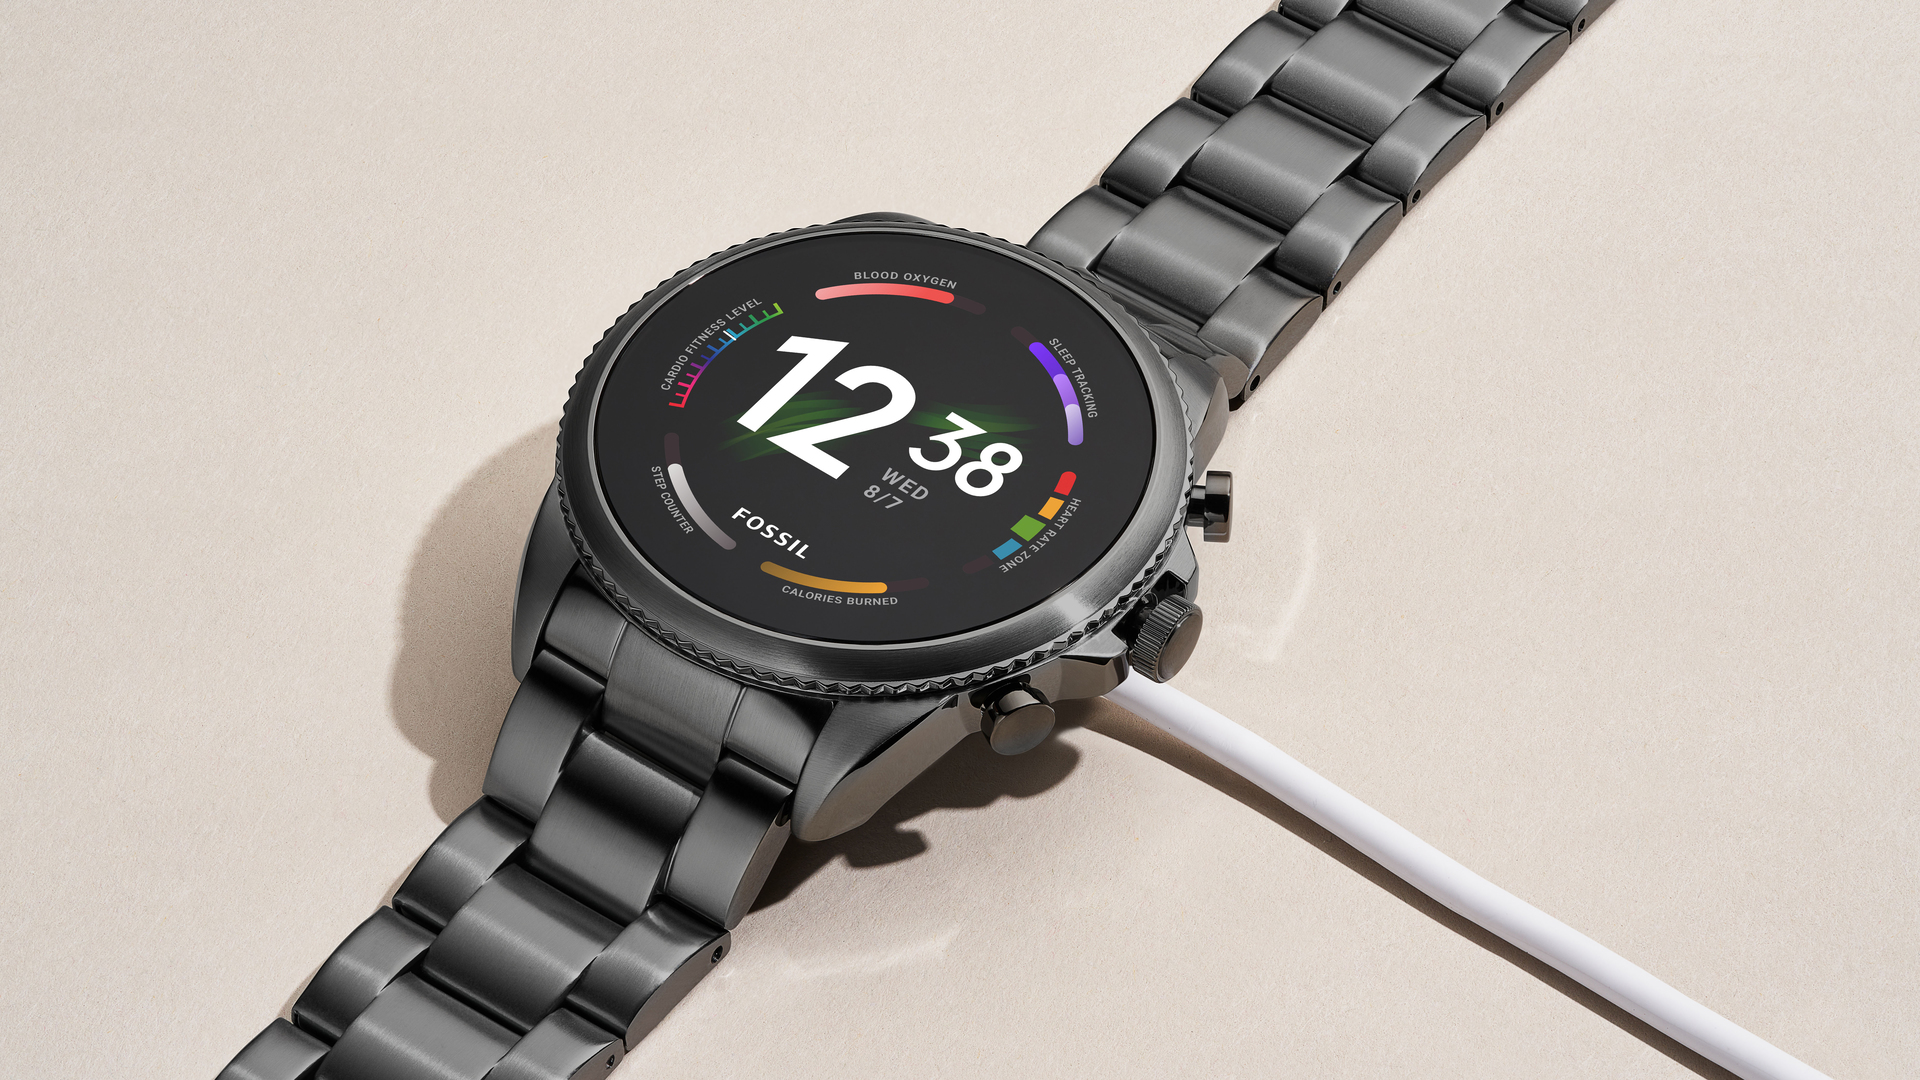 The Fossil Gen 6 smartwatch stainless steel on table with charger attached.